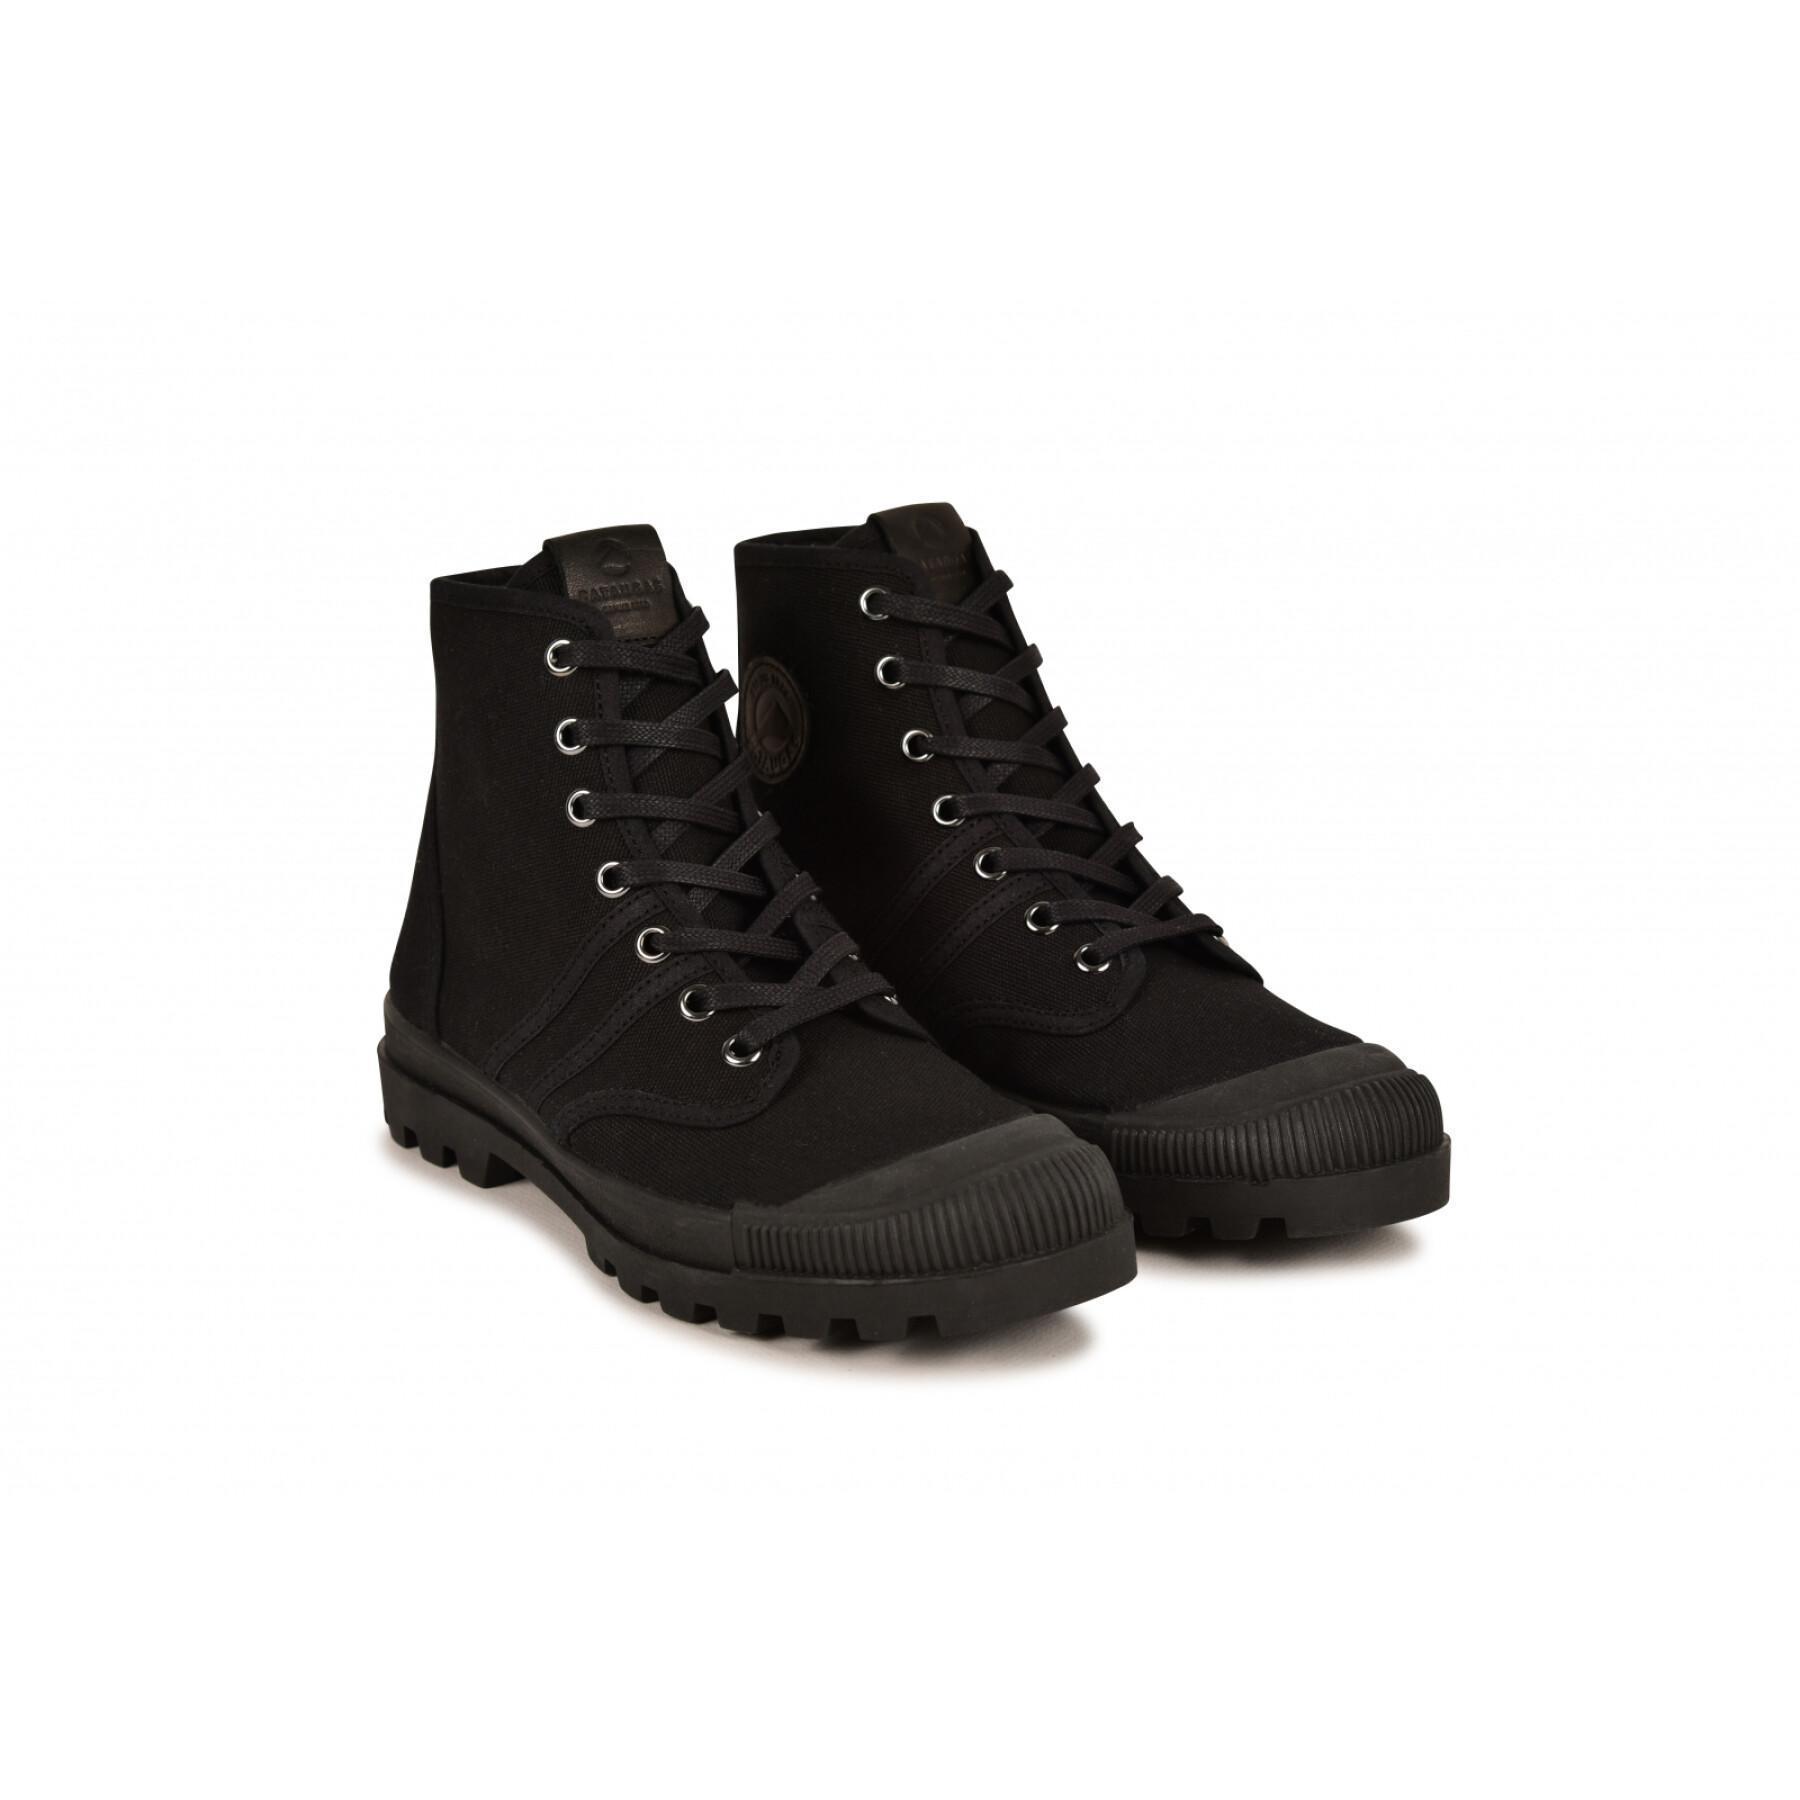 Boots woman Pataugas Authentique/T F4g